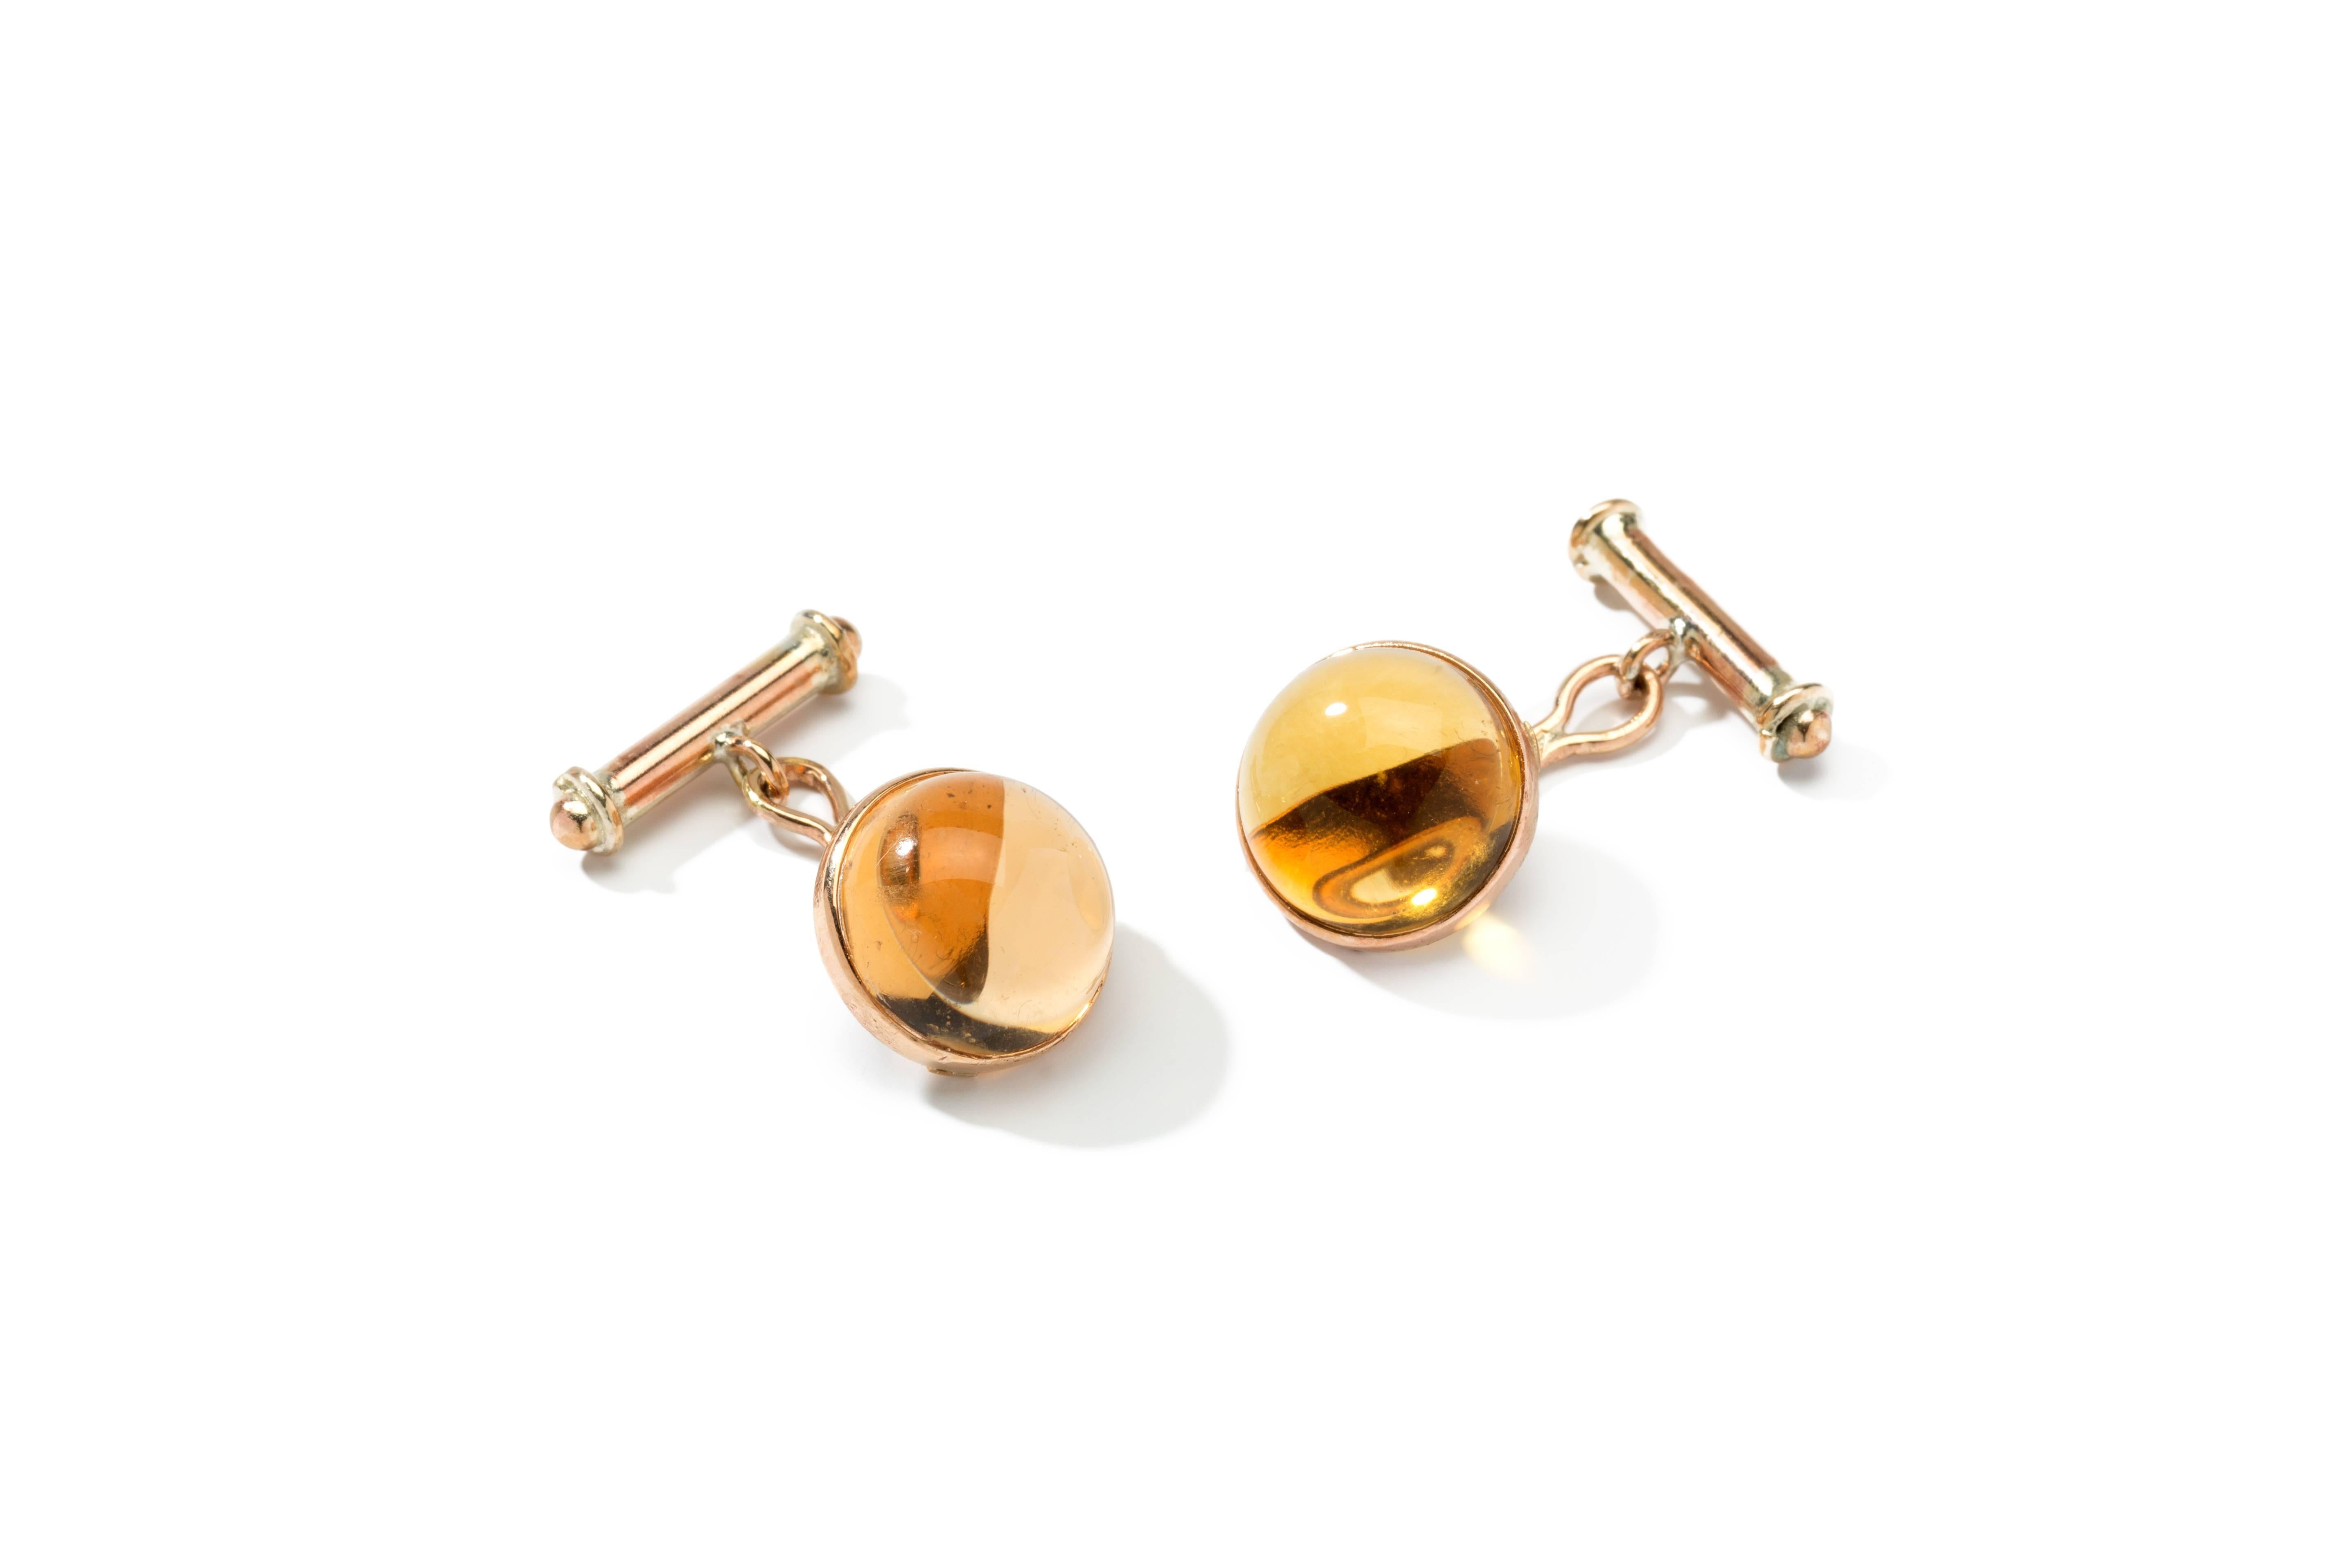 Italy, 1970s. A pair of cufflinks made in 10 K yellow gold. With 2 cabochon-cut citrine. Total weight: 6,16 grams. Diameter: 0.51 in ( 1,3 cm )